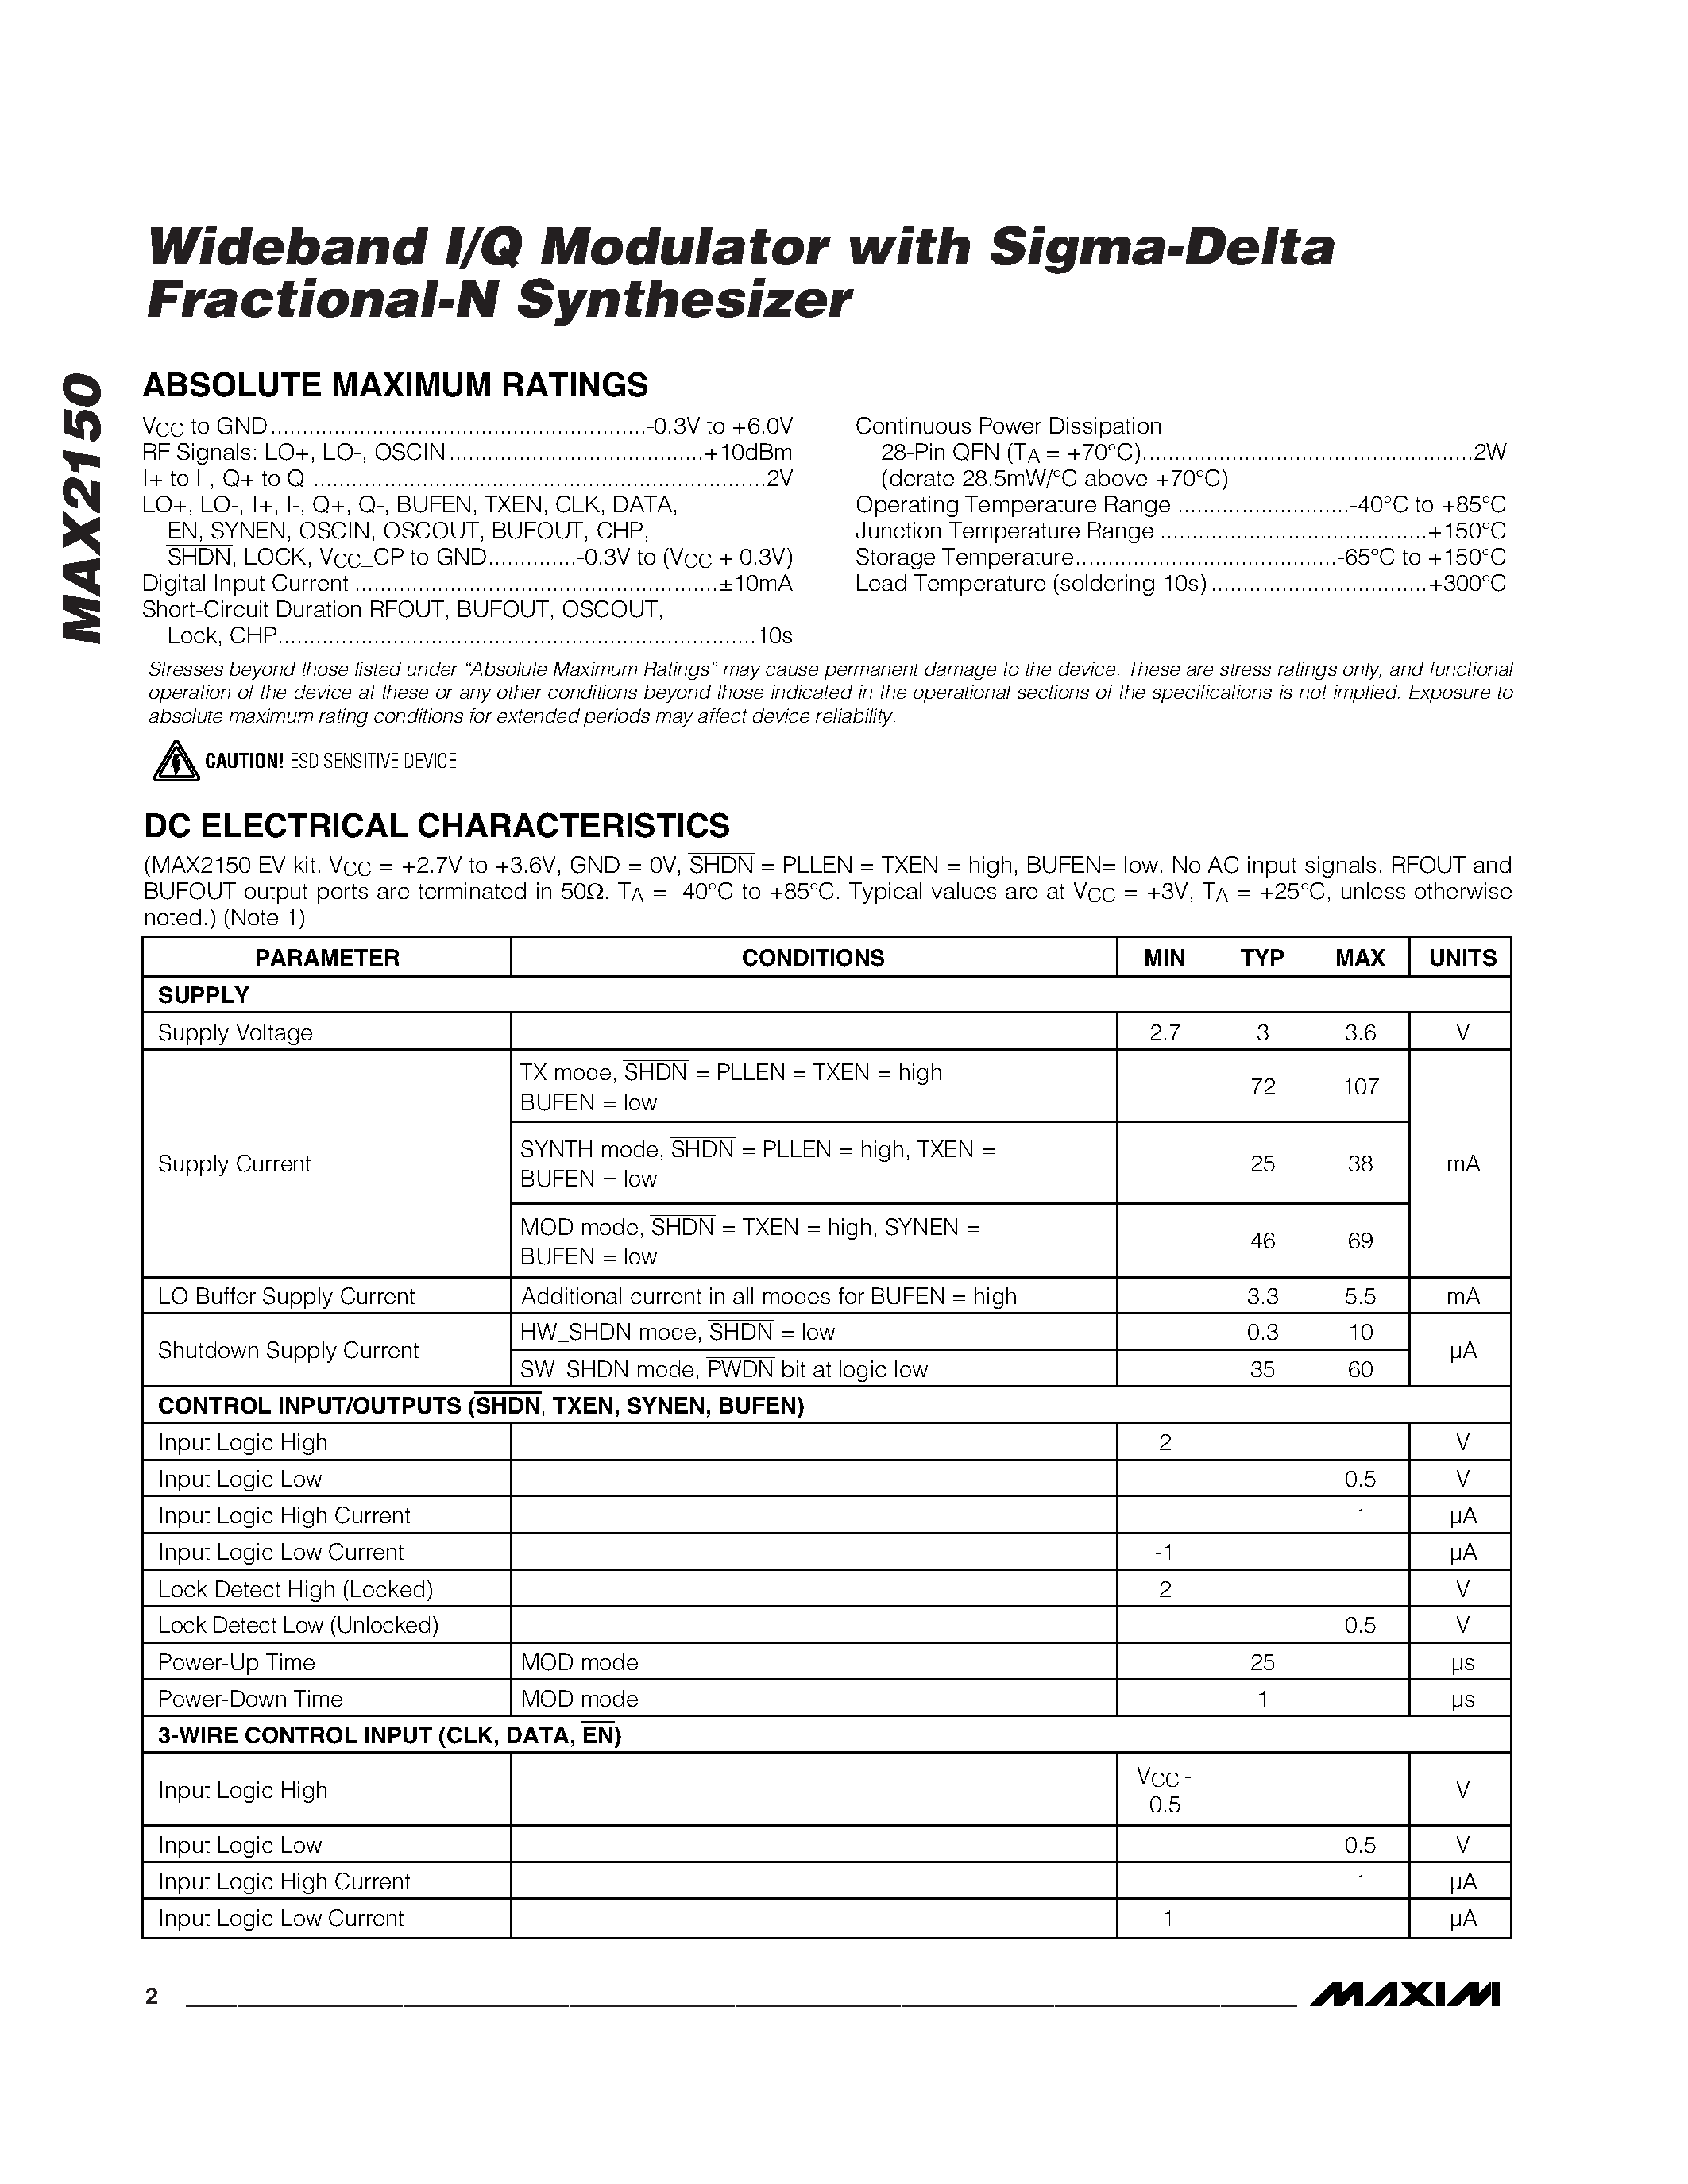 Datasheet MAX2150 - Wideband I/Q Modulator with Sigma-Delta Fractional-N Synthesizer page 2